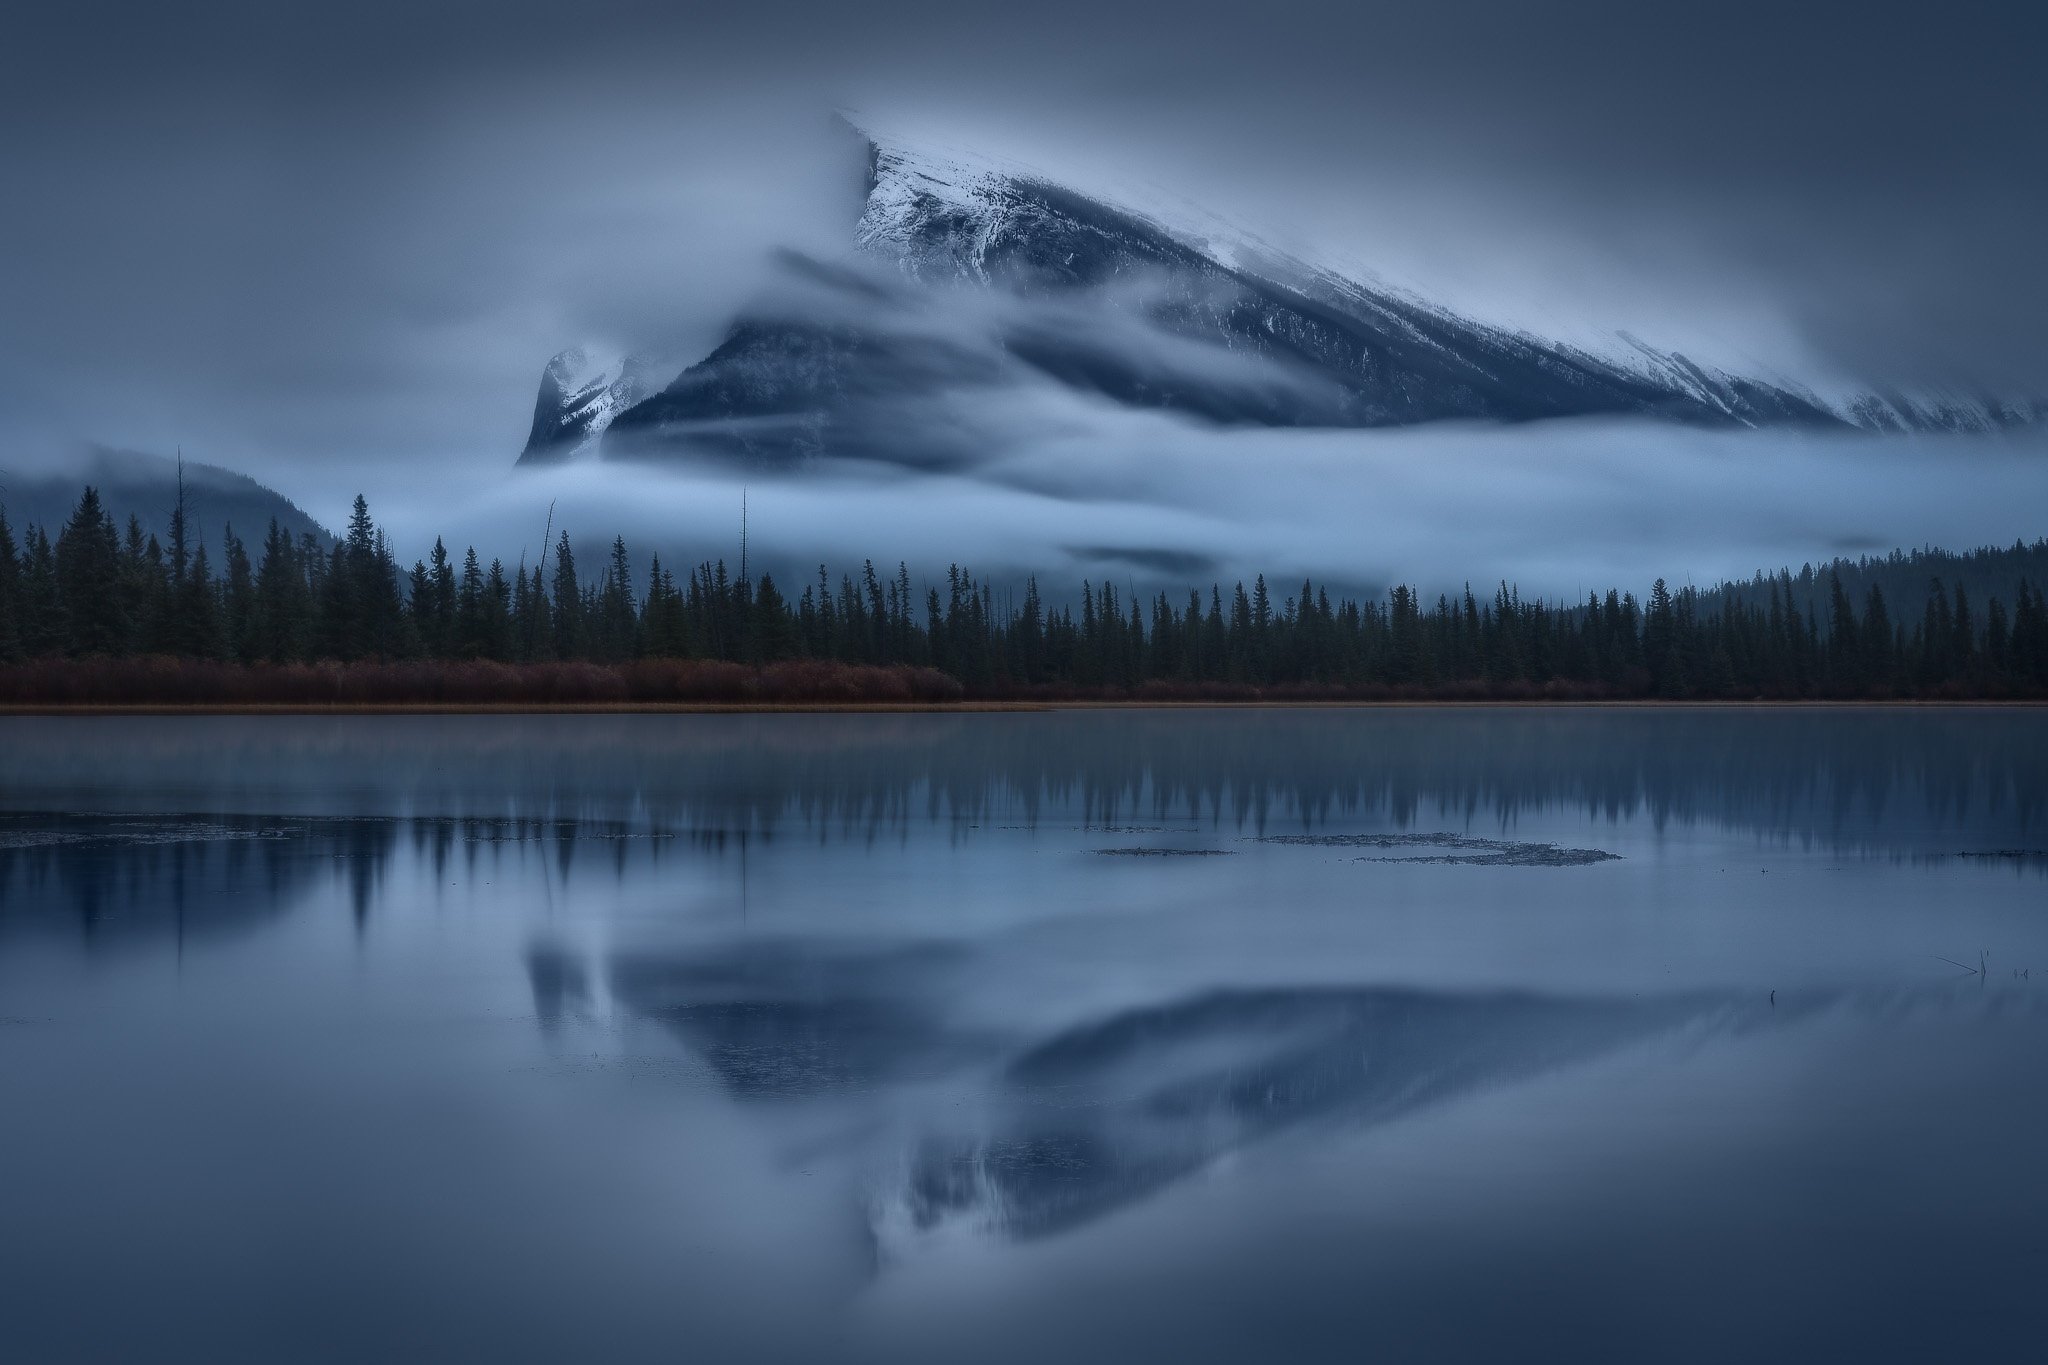 nature, Landscape, Mountains, Clouds, Alberta National Park, Alberta, Canada, Lake, Trees, Forest, Water, Mist, Reflection, Long exposure, Snowy peak, Mount Rundle, Morning Wallpaper